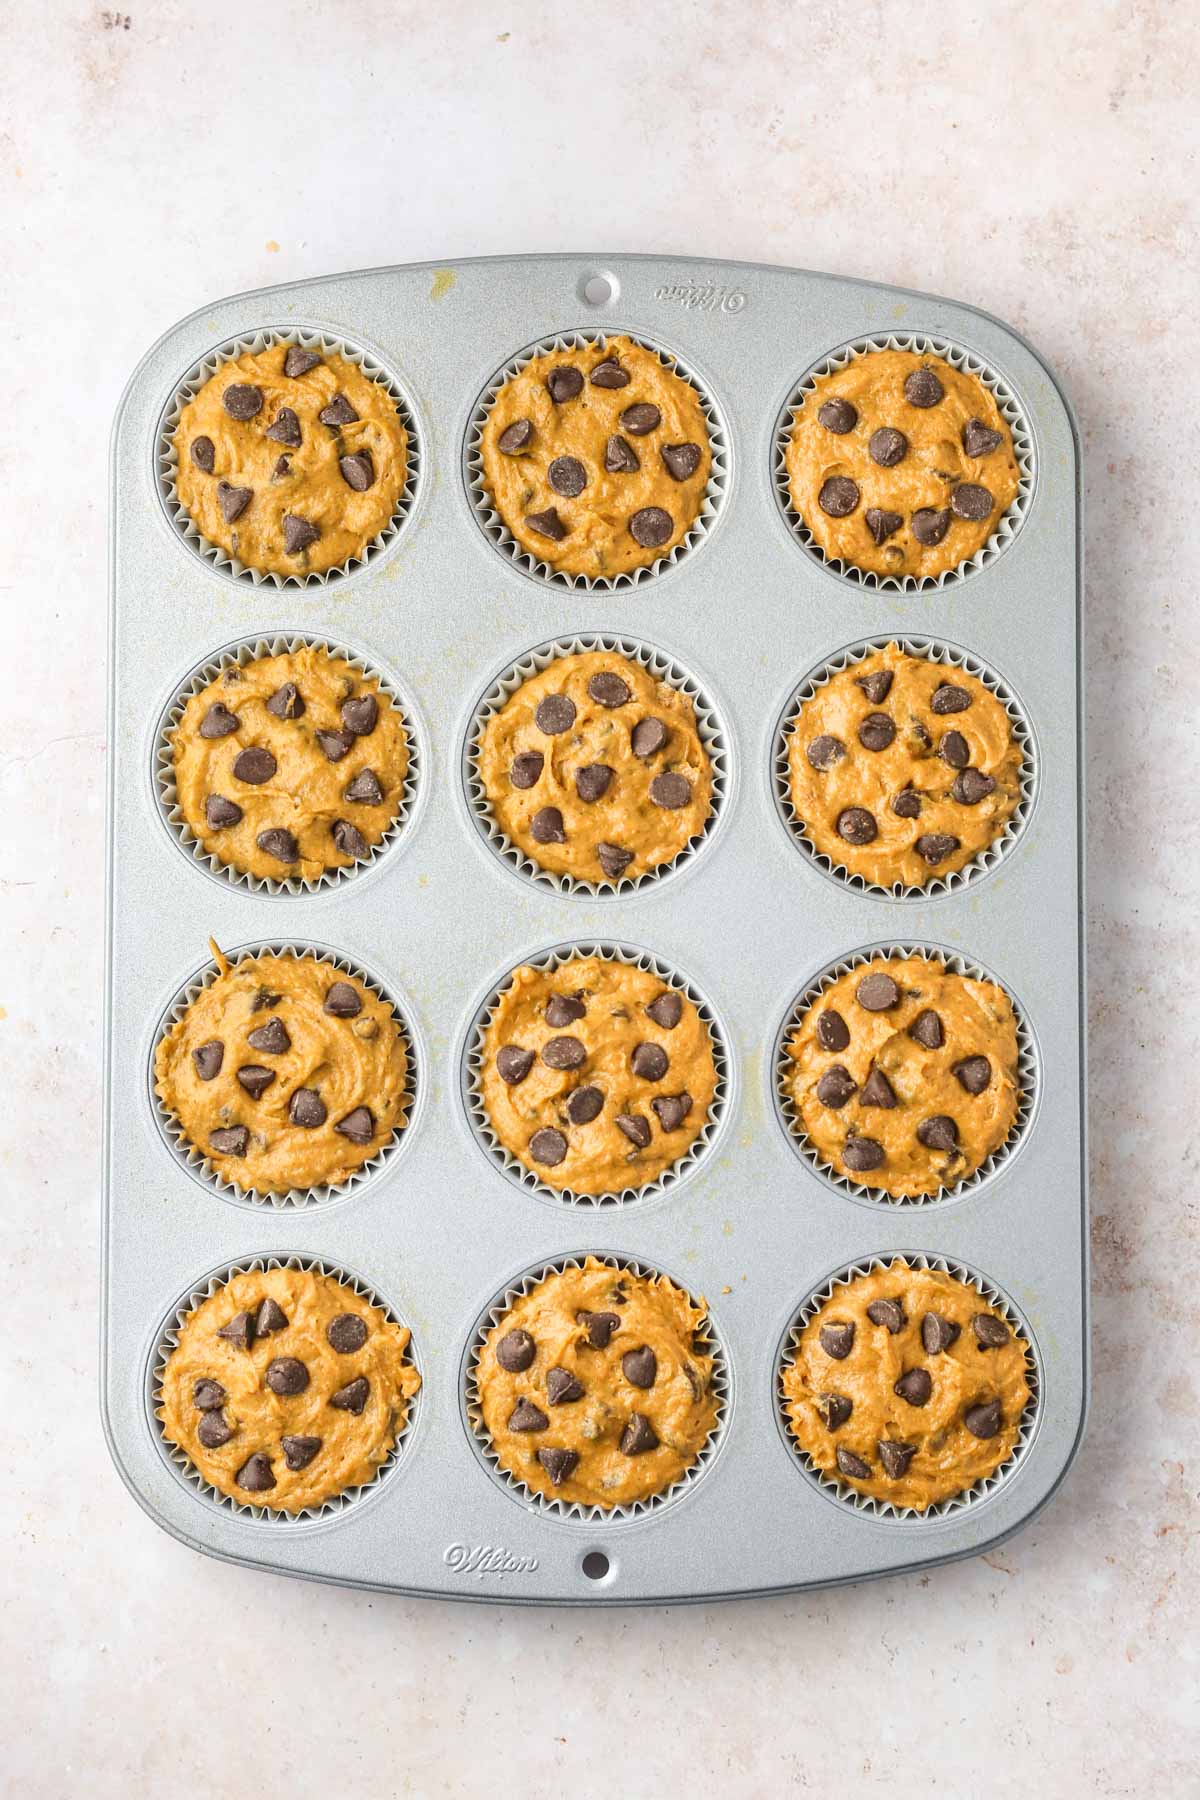 A muffin pan filled with pumpkin muffin batter and chocolate chips on top before baking.